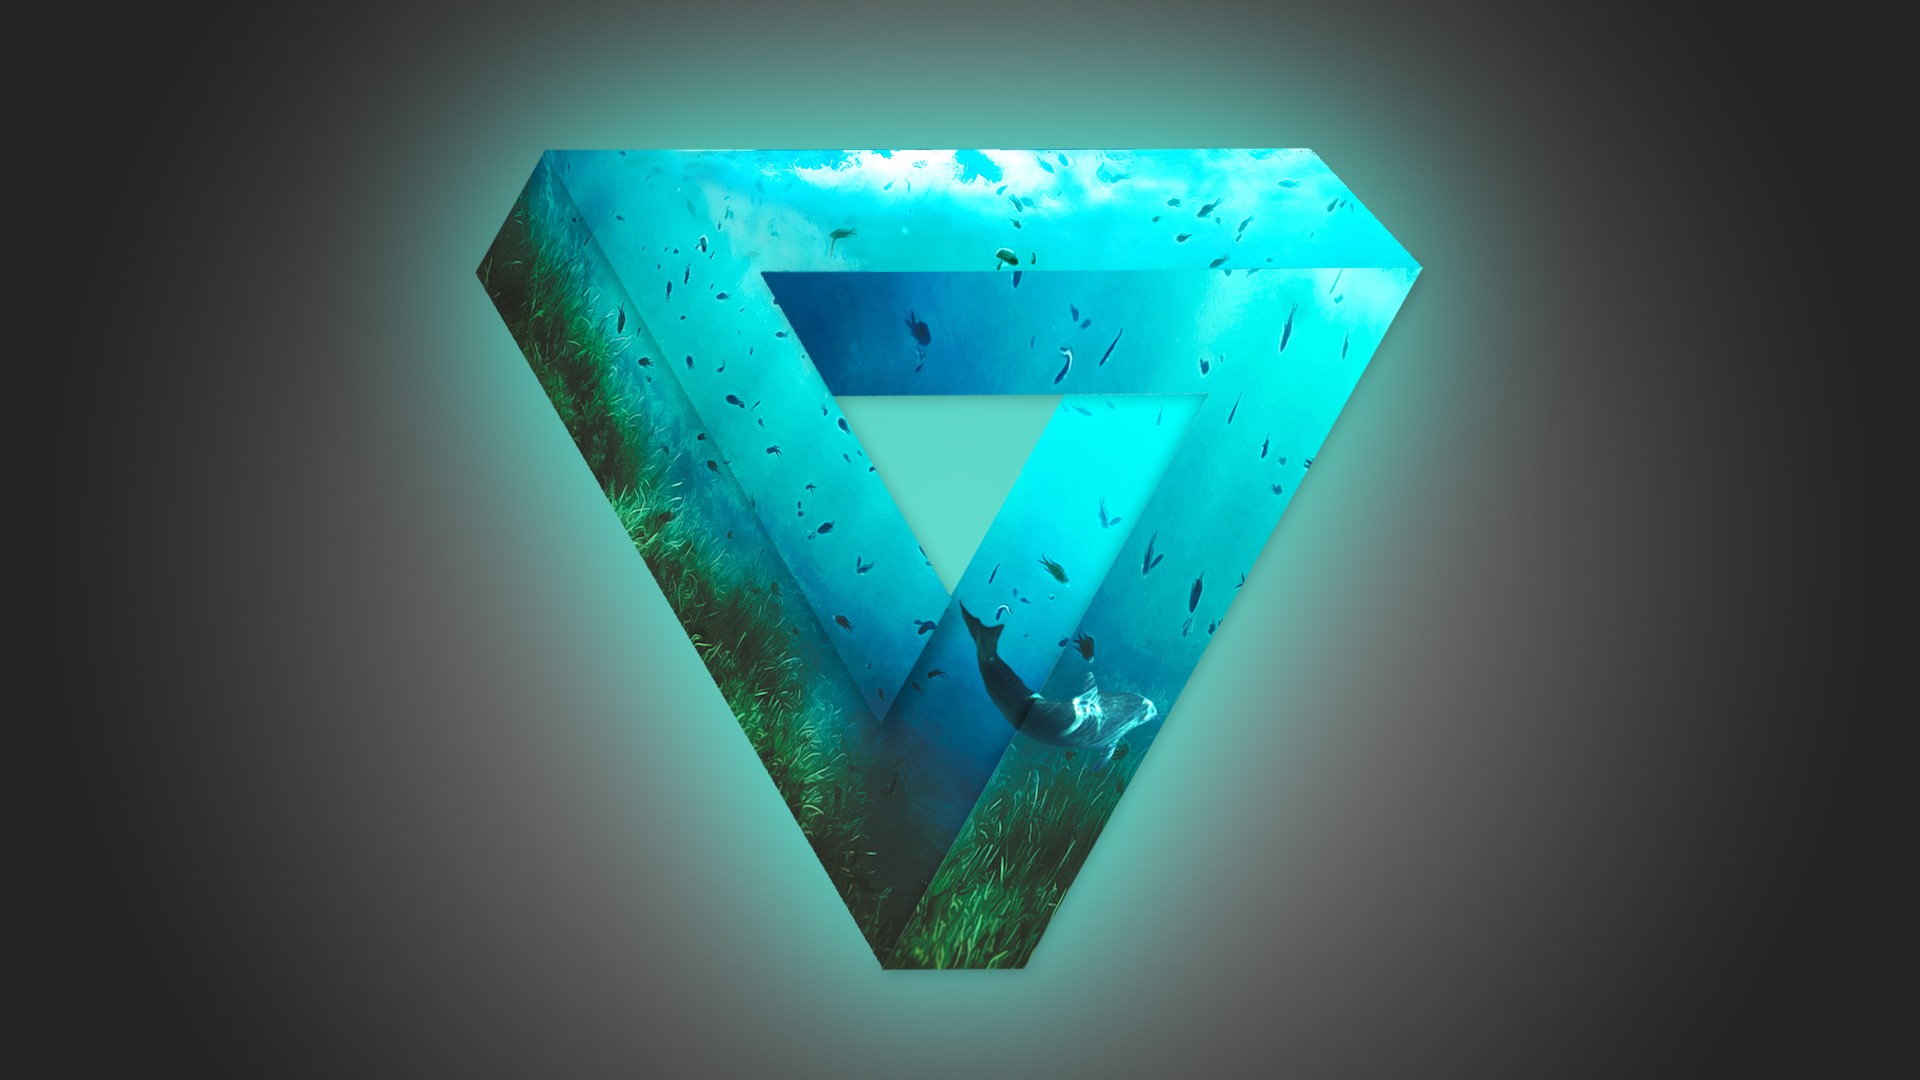 General 1920x1080 soft gradient  triangle glowing fish photoshopped whale Penrose triangle underwater optical illusion minimalism turquoise cyan